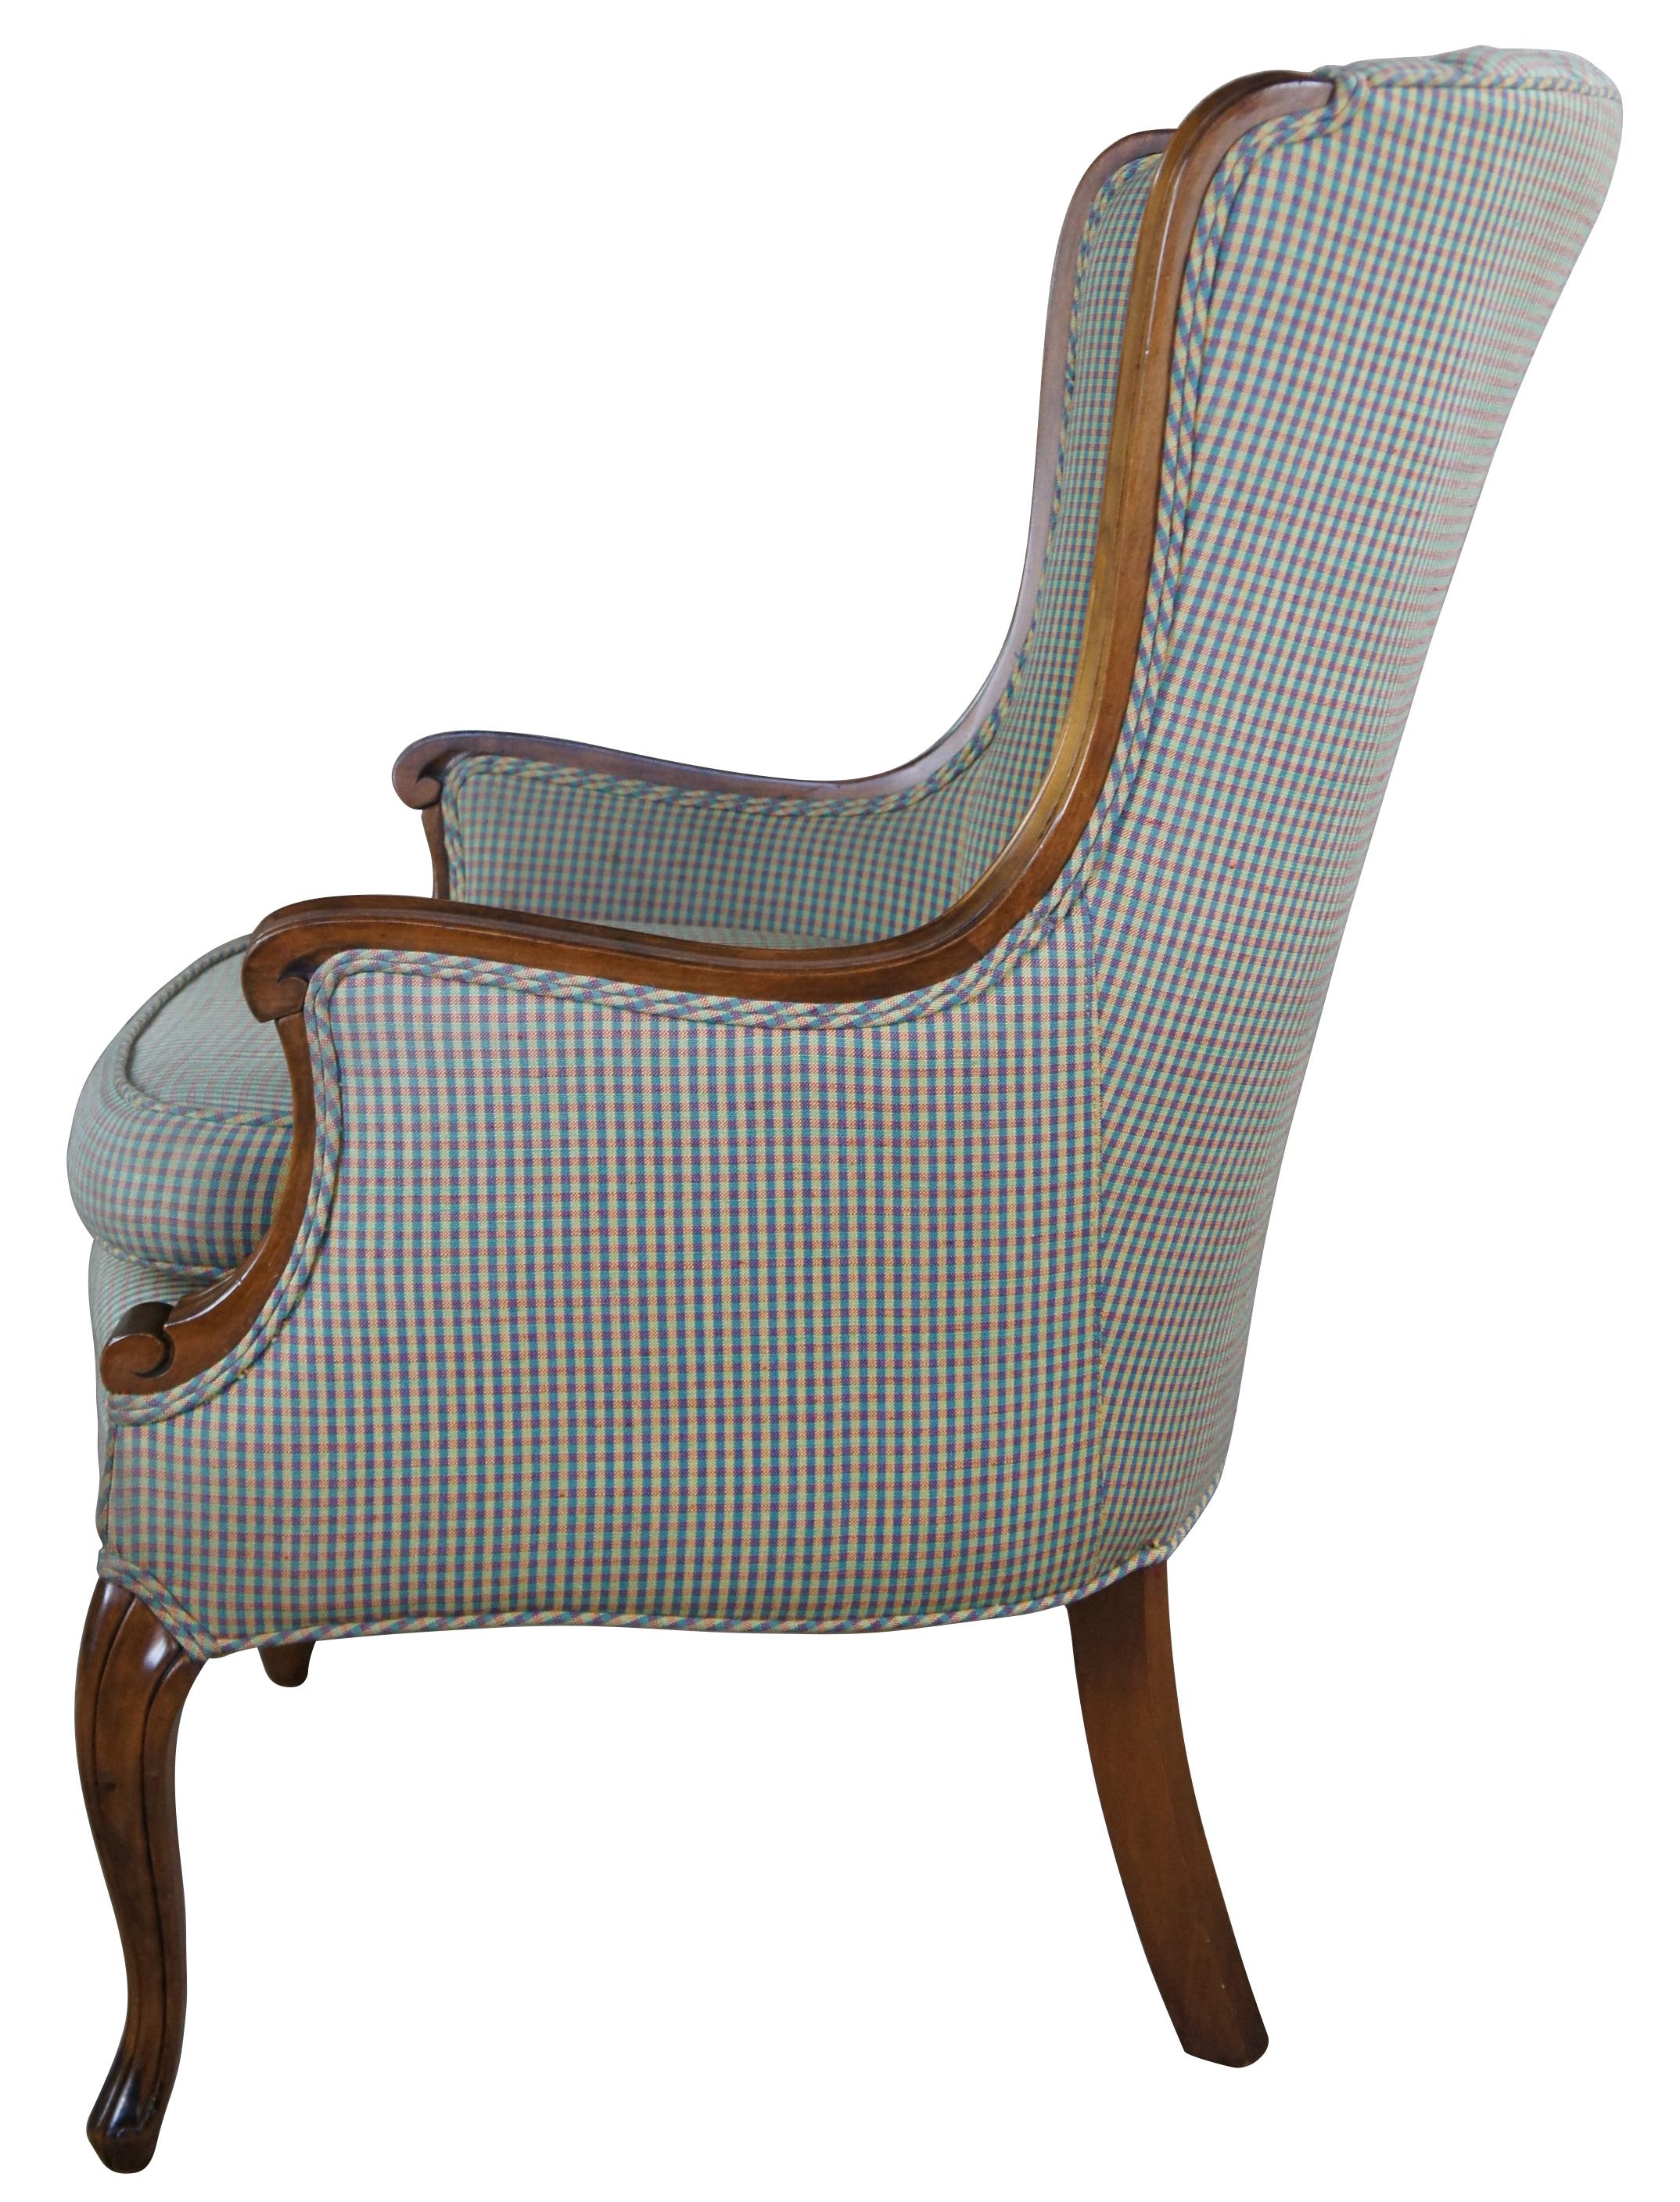 channel back wing chair